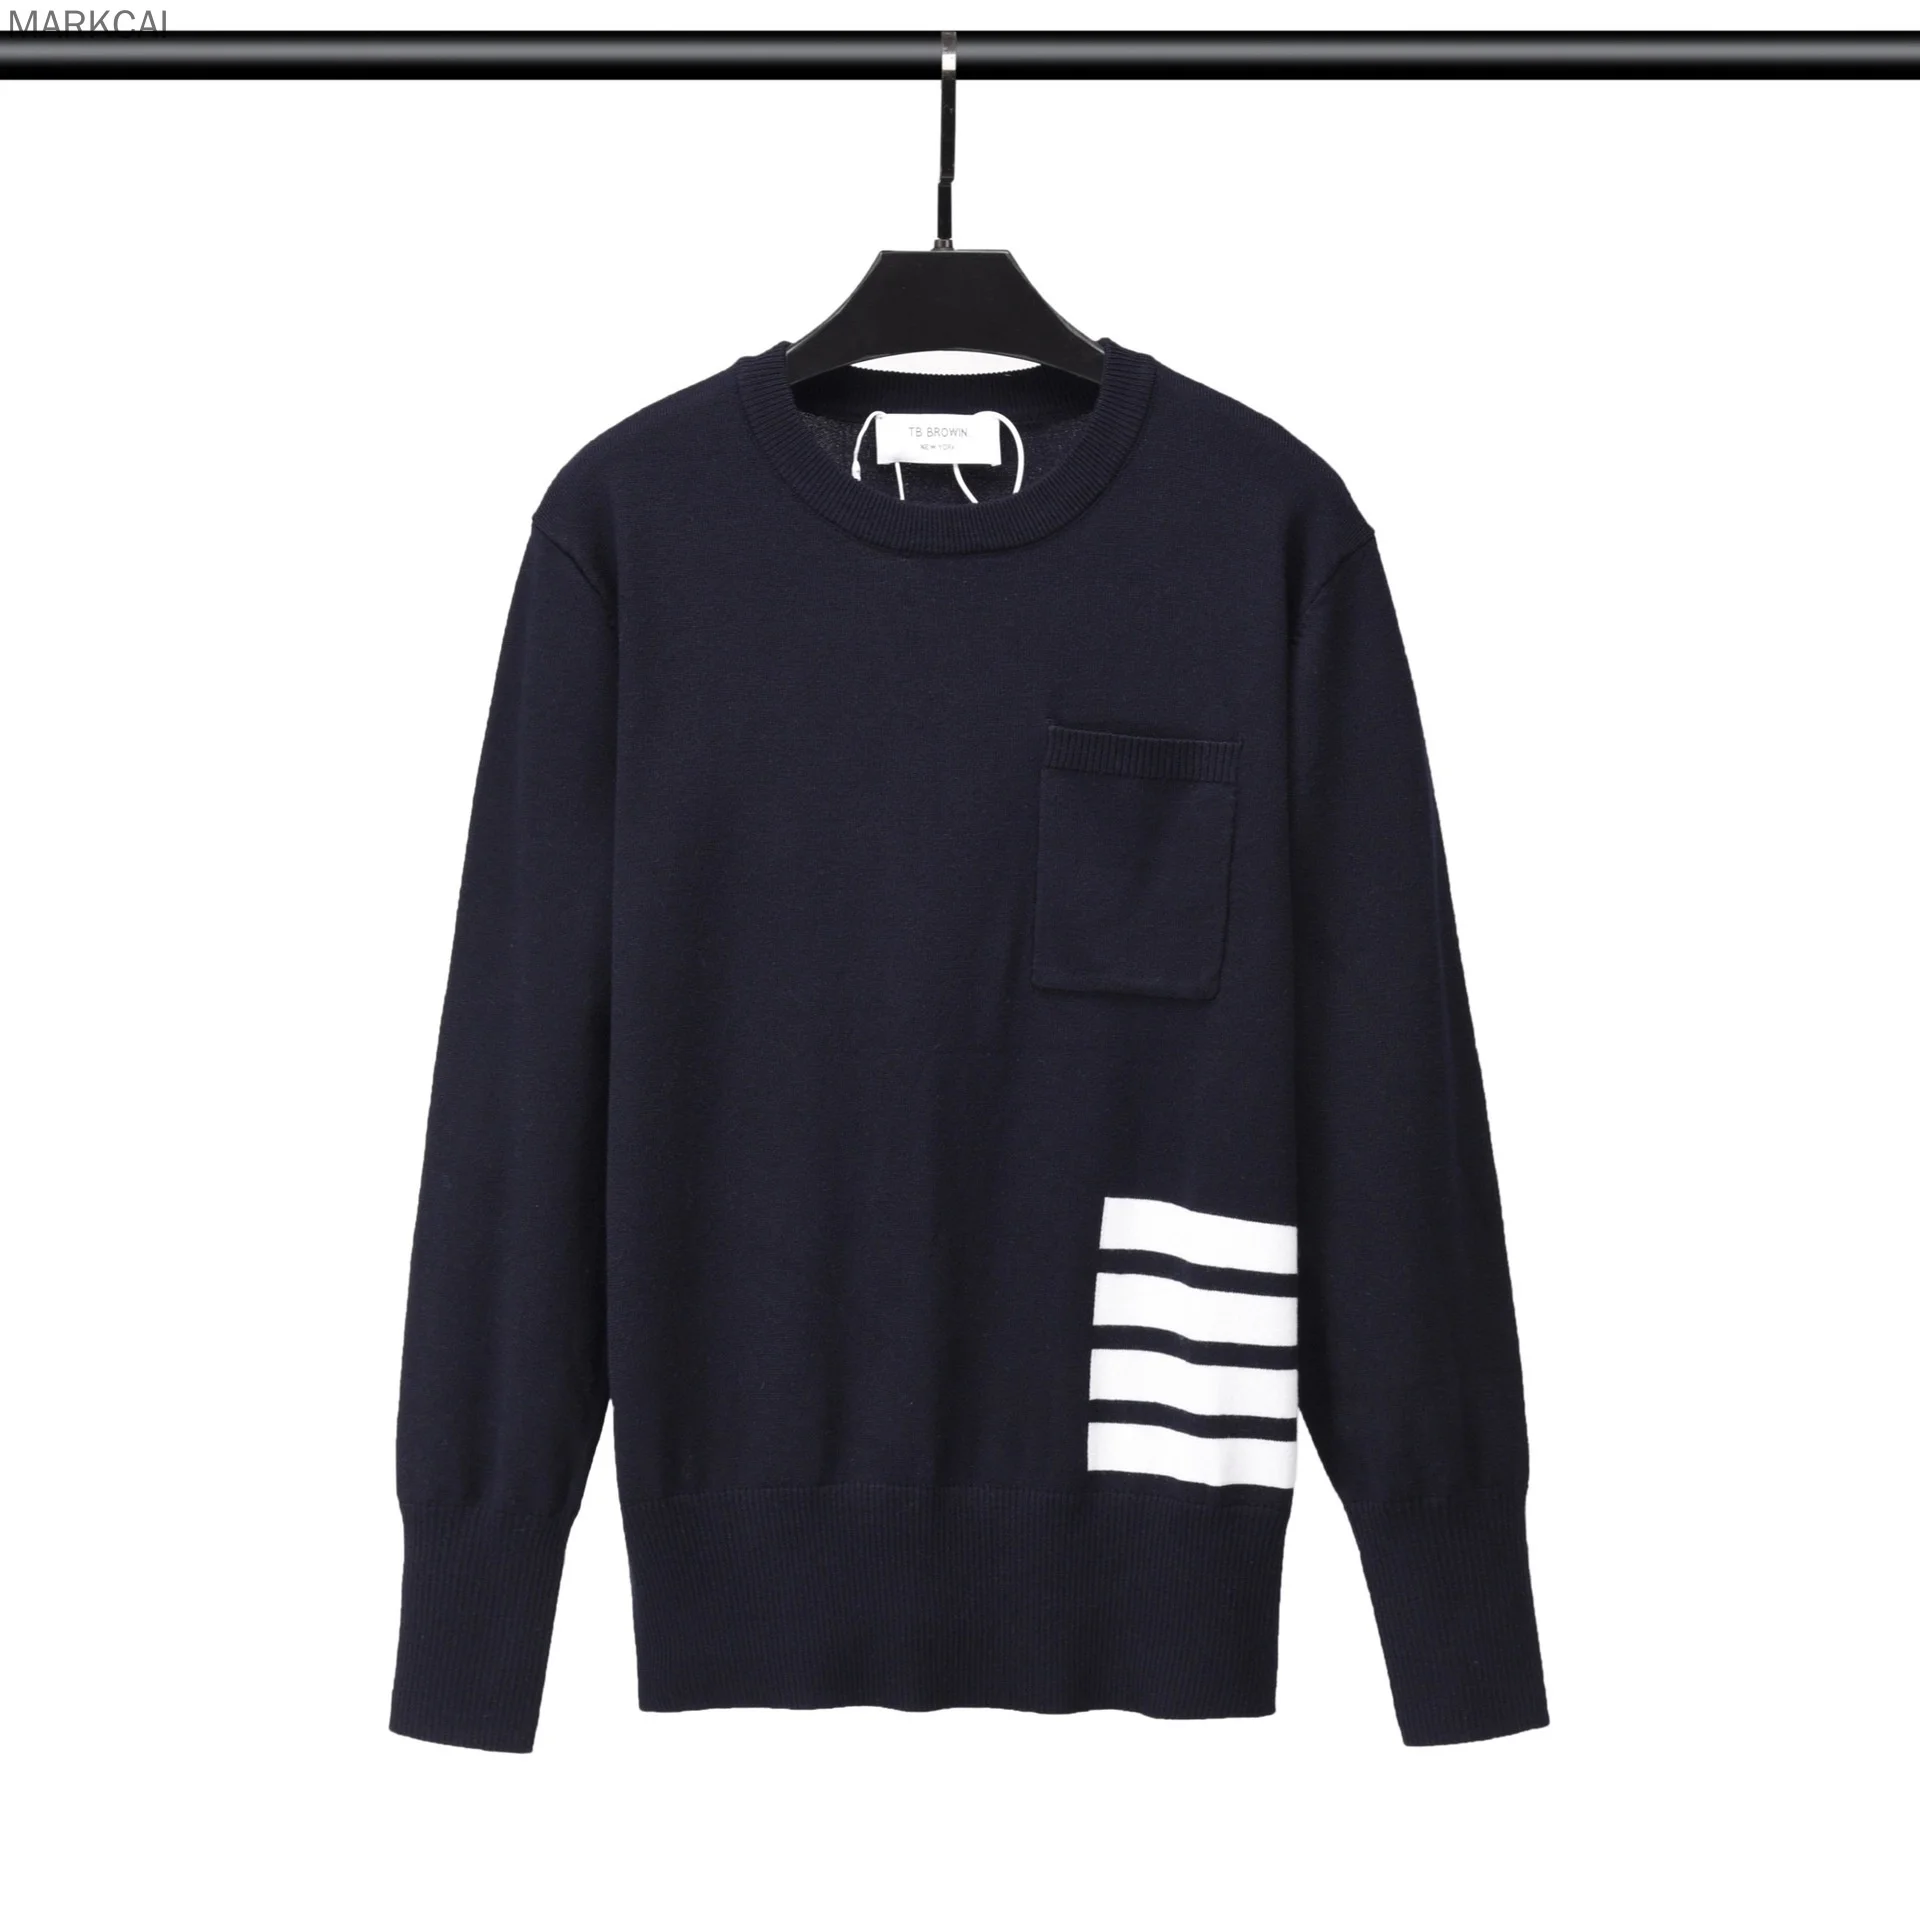 2022 Autumn Men Sweater Long Sleeve Pullover Casual Knitted O-Neck Korean Style Striped Small Pocket High Quality